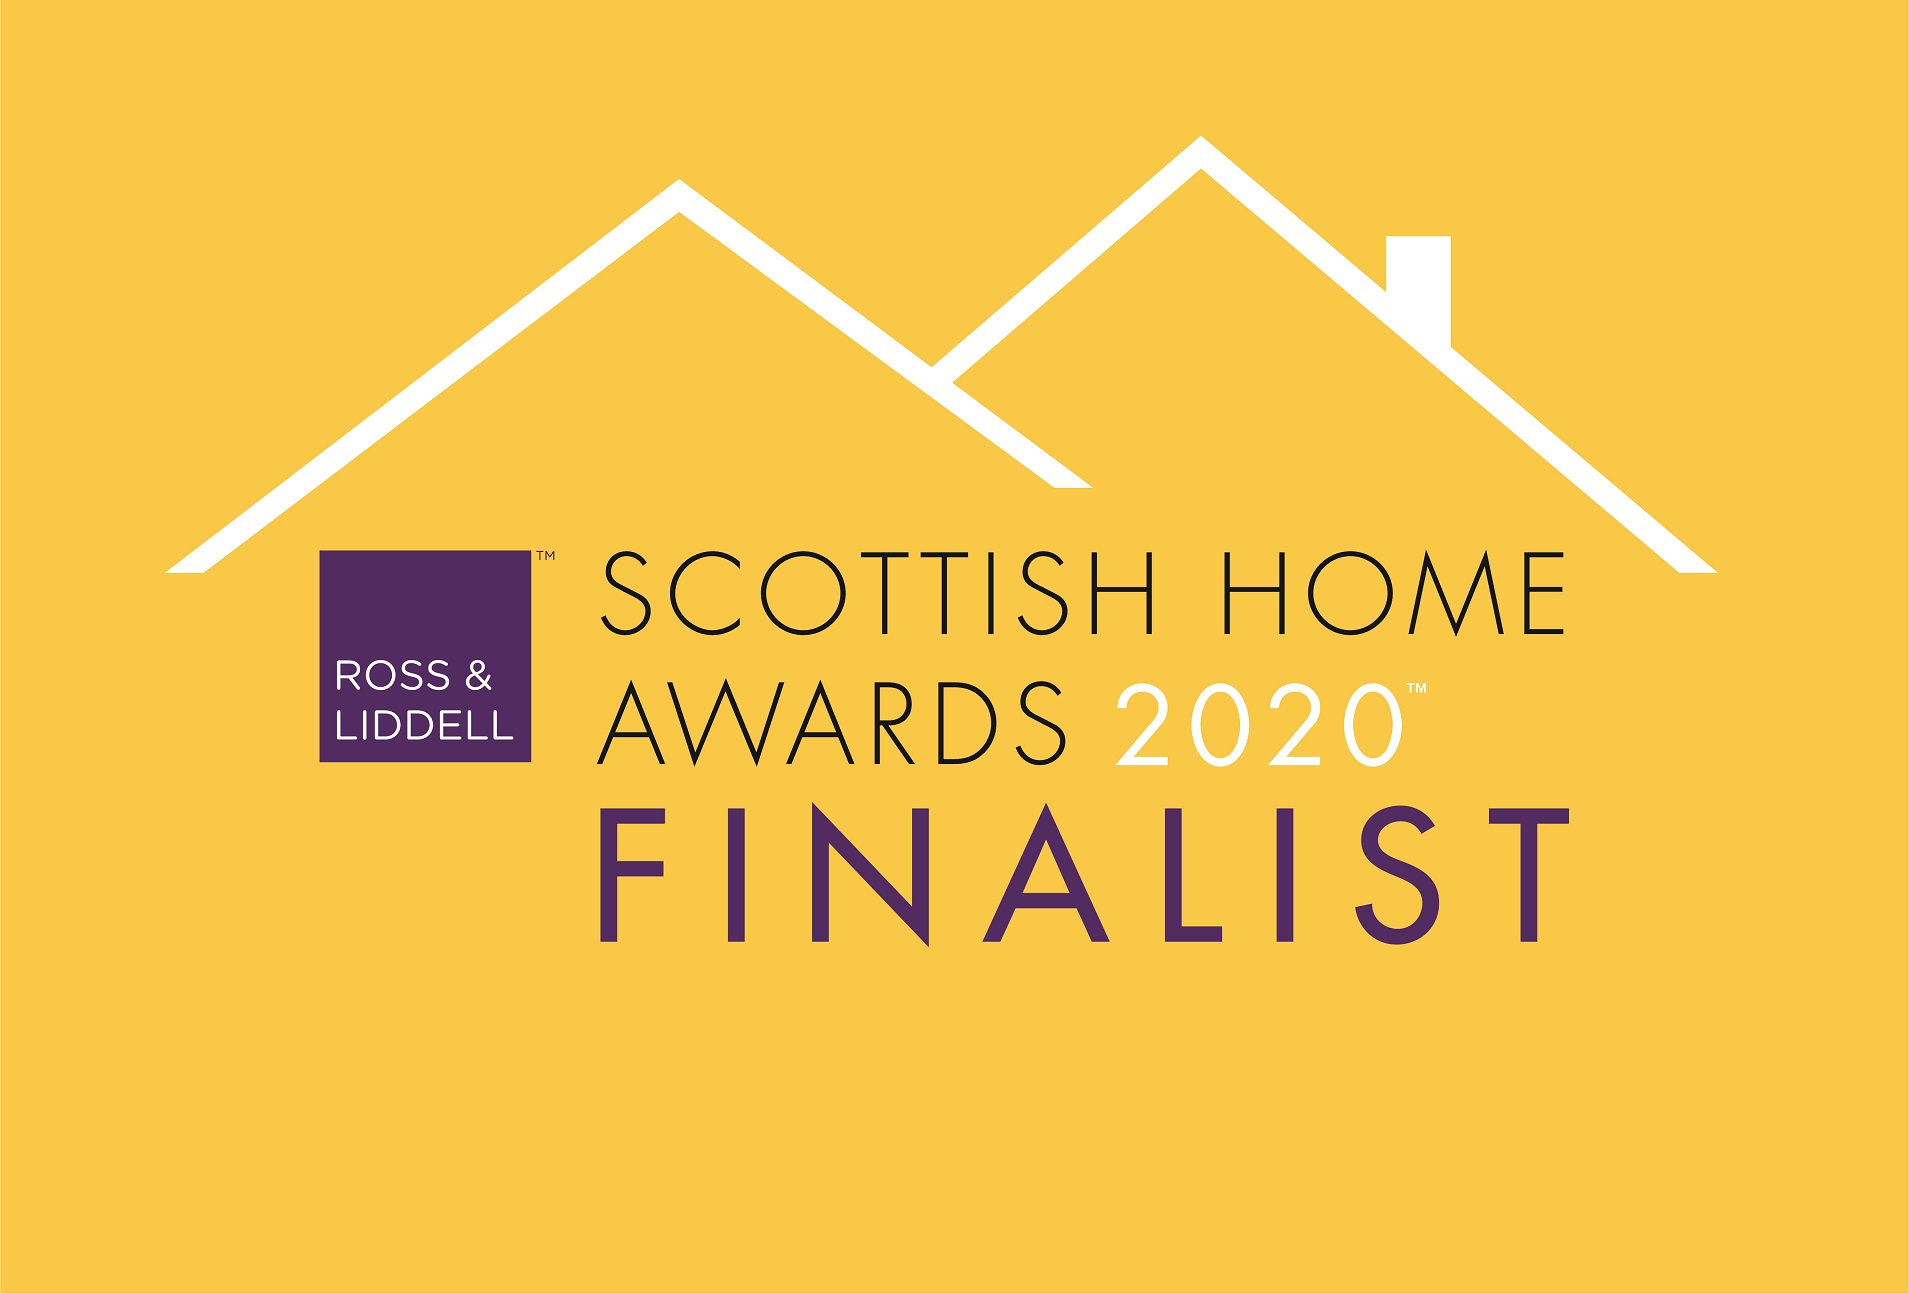 Finalists announced for Scottish Home Awards